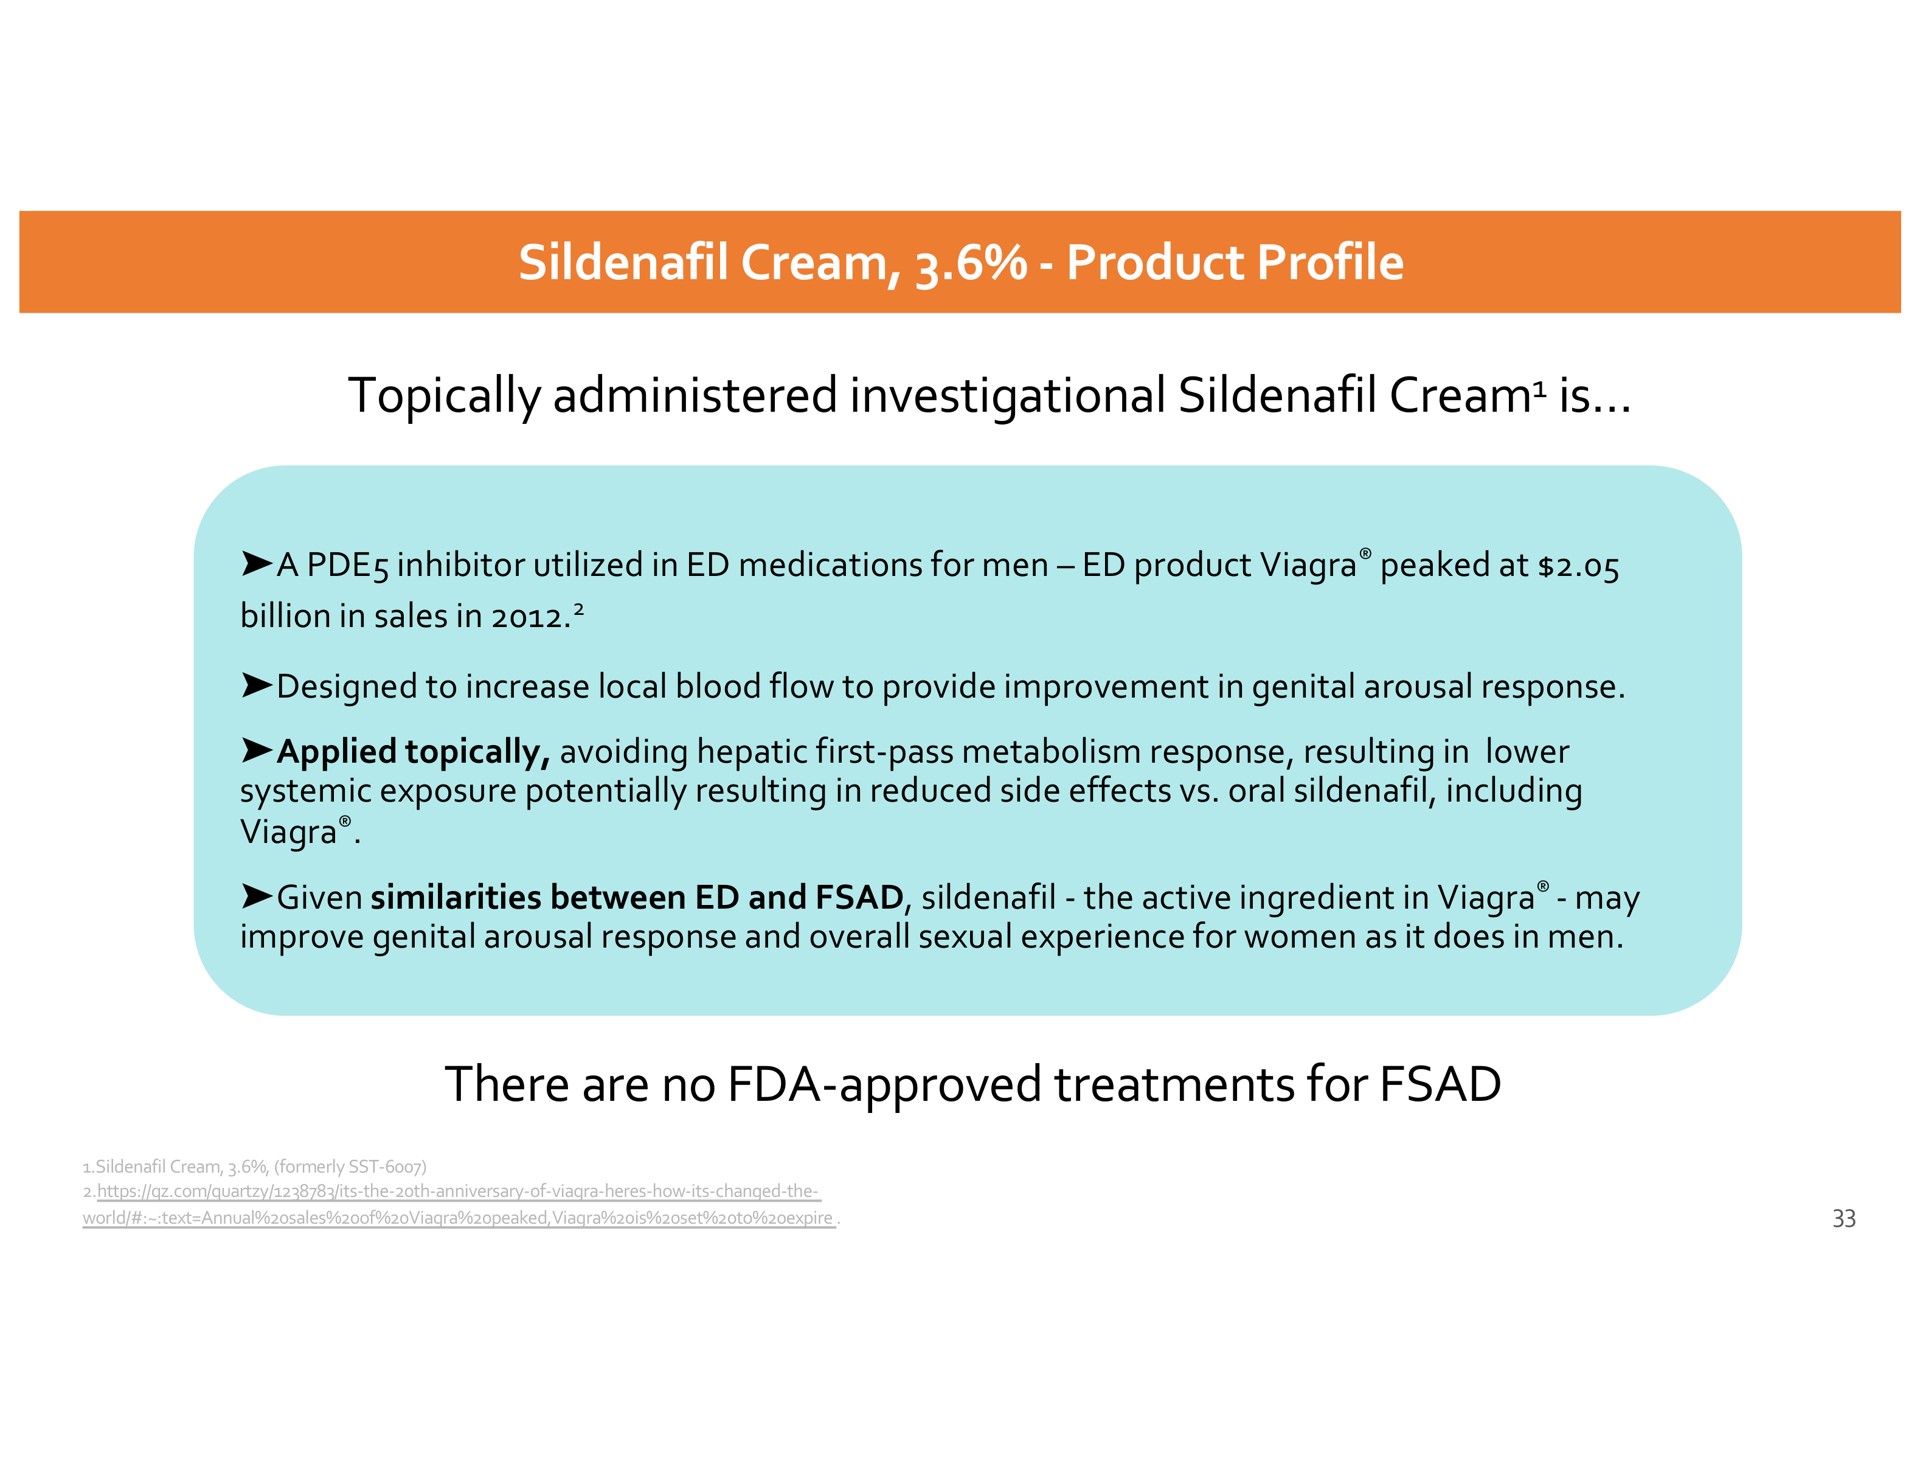 cream product profile topically administered investigational cream is a inhibitor utilized in medications for men product peaked at billion in sales in designed to increase local blood flow to provide improvement in genital arousal response applied topically avoiding hepatic first pass metabolism response resulting in lower systemic exposure potentially resulting in reduced side effects oral including given similarities between and the active ingredient in may improve genital arousal response and overall sexual experience for women as it does in men there are no approved treatments for | Dare Bioscience